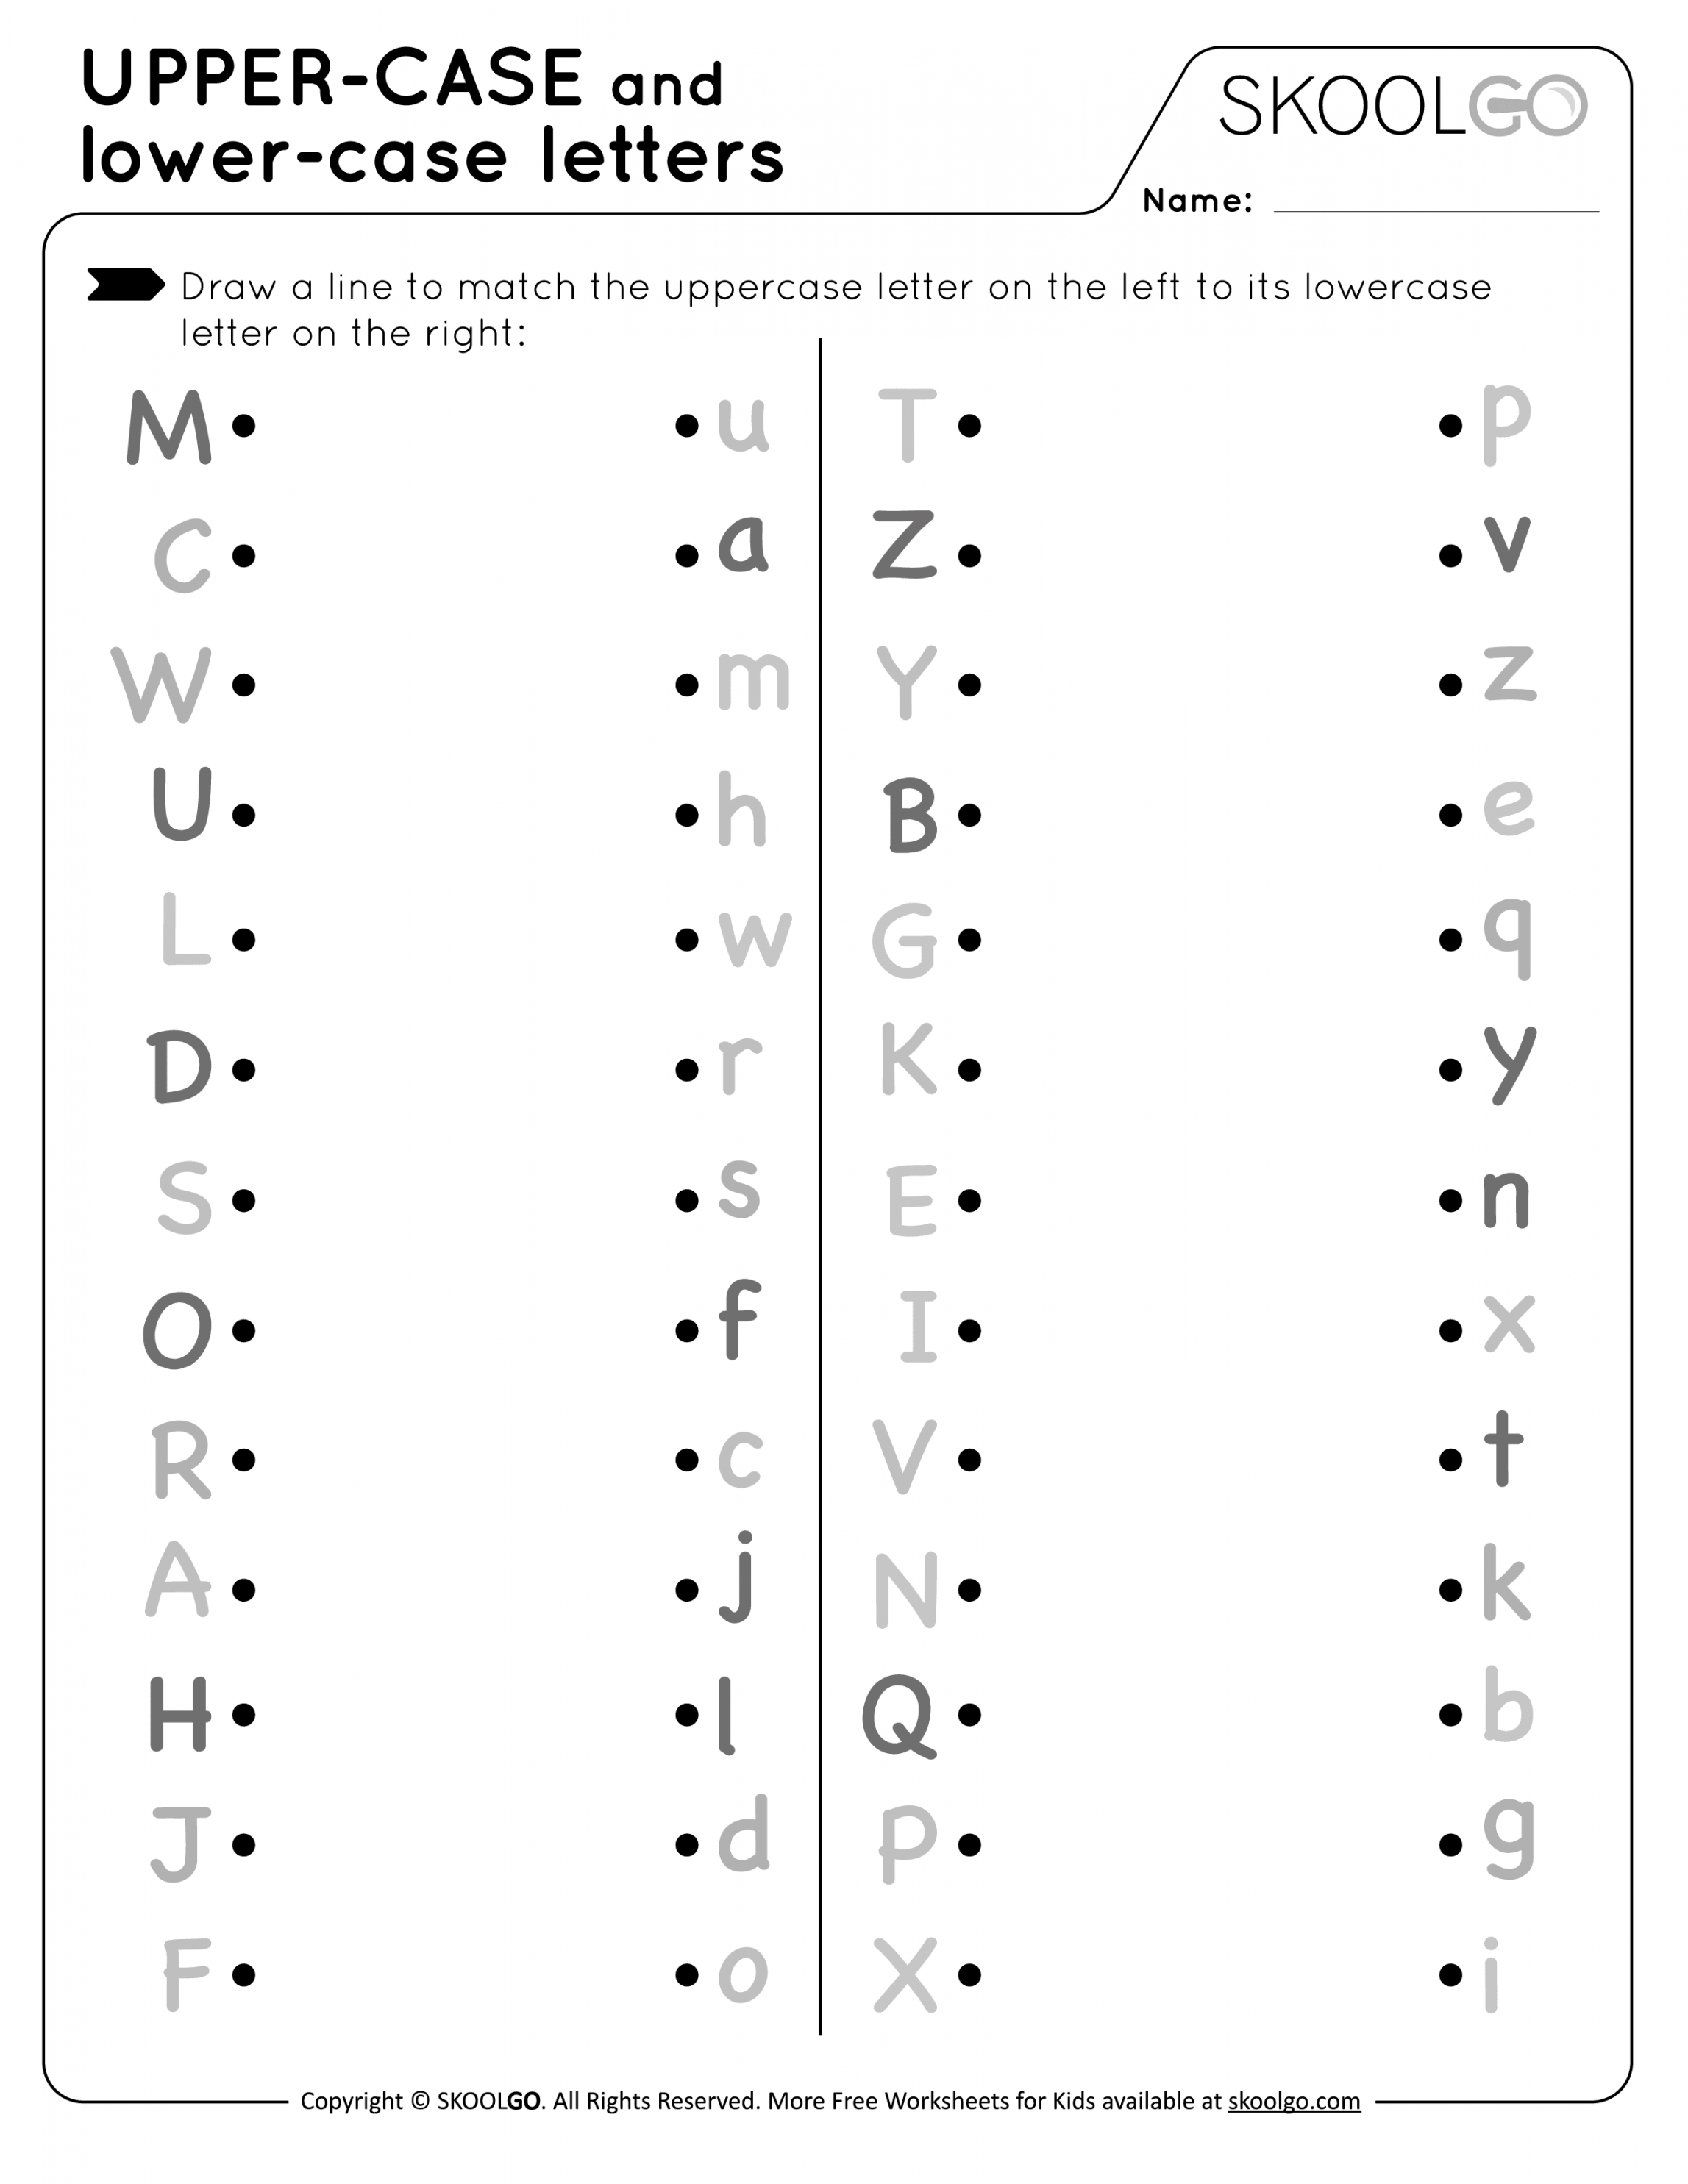 Upper-Case and Lower-Case Letters - Free Worksheet for Kids - FREE Printables - Free Printable Uppercase And Lowercase Letters Worksheets